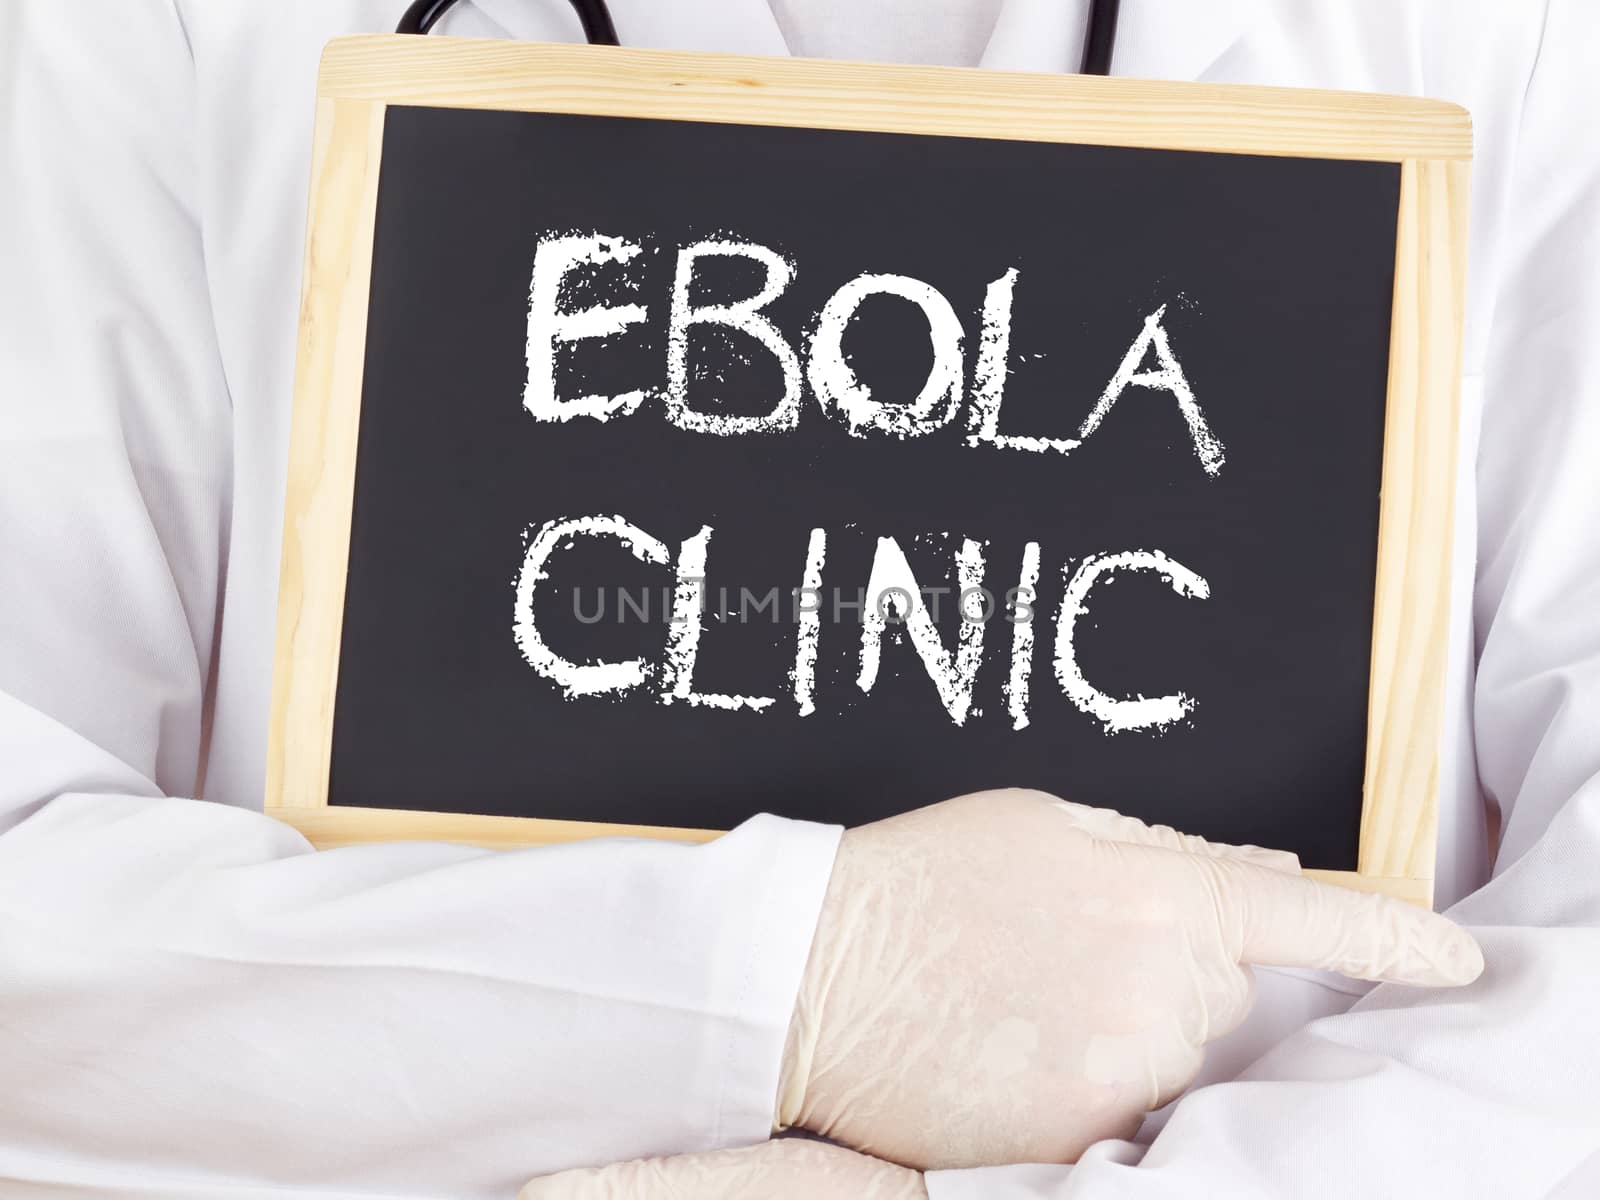 Doctor shows information: Ebola clinic by gwolters